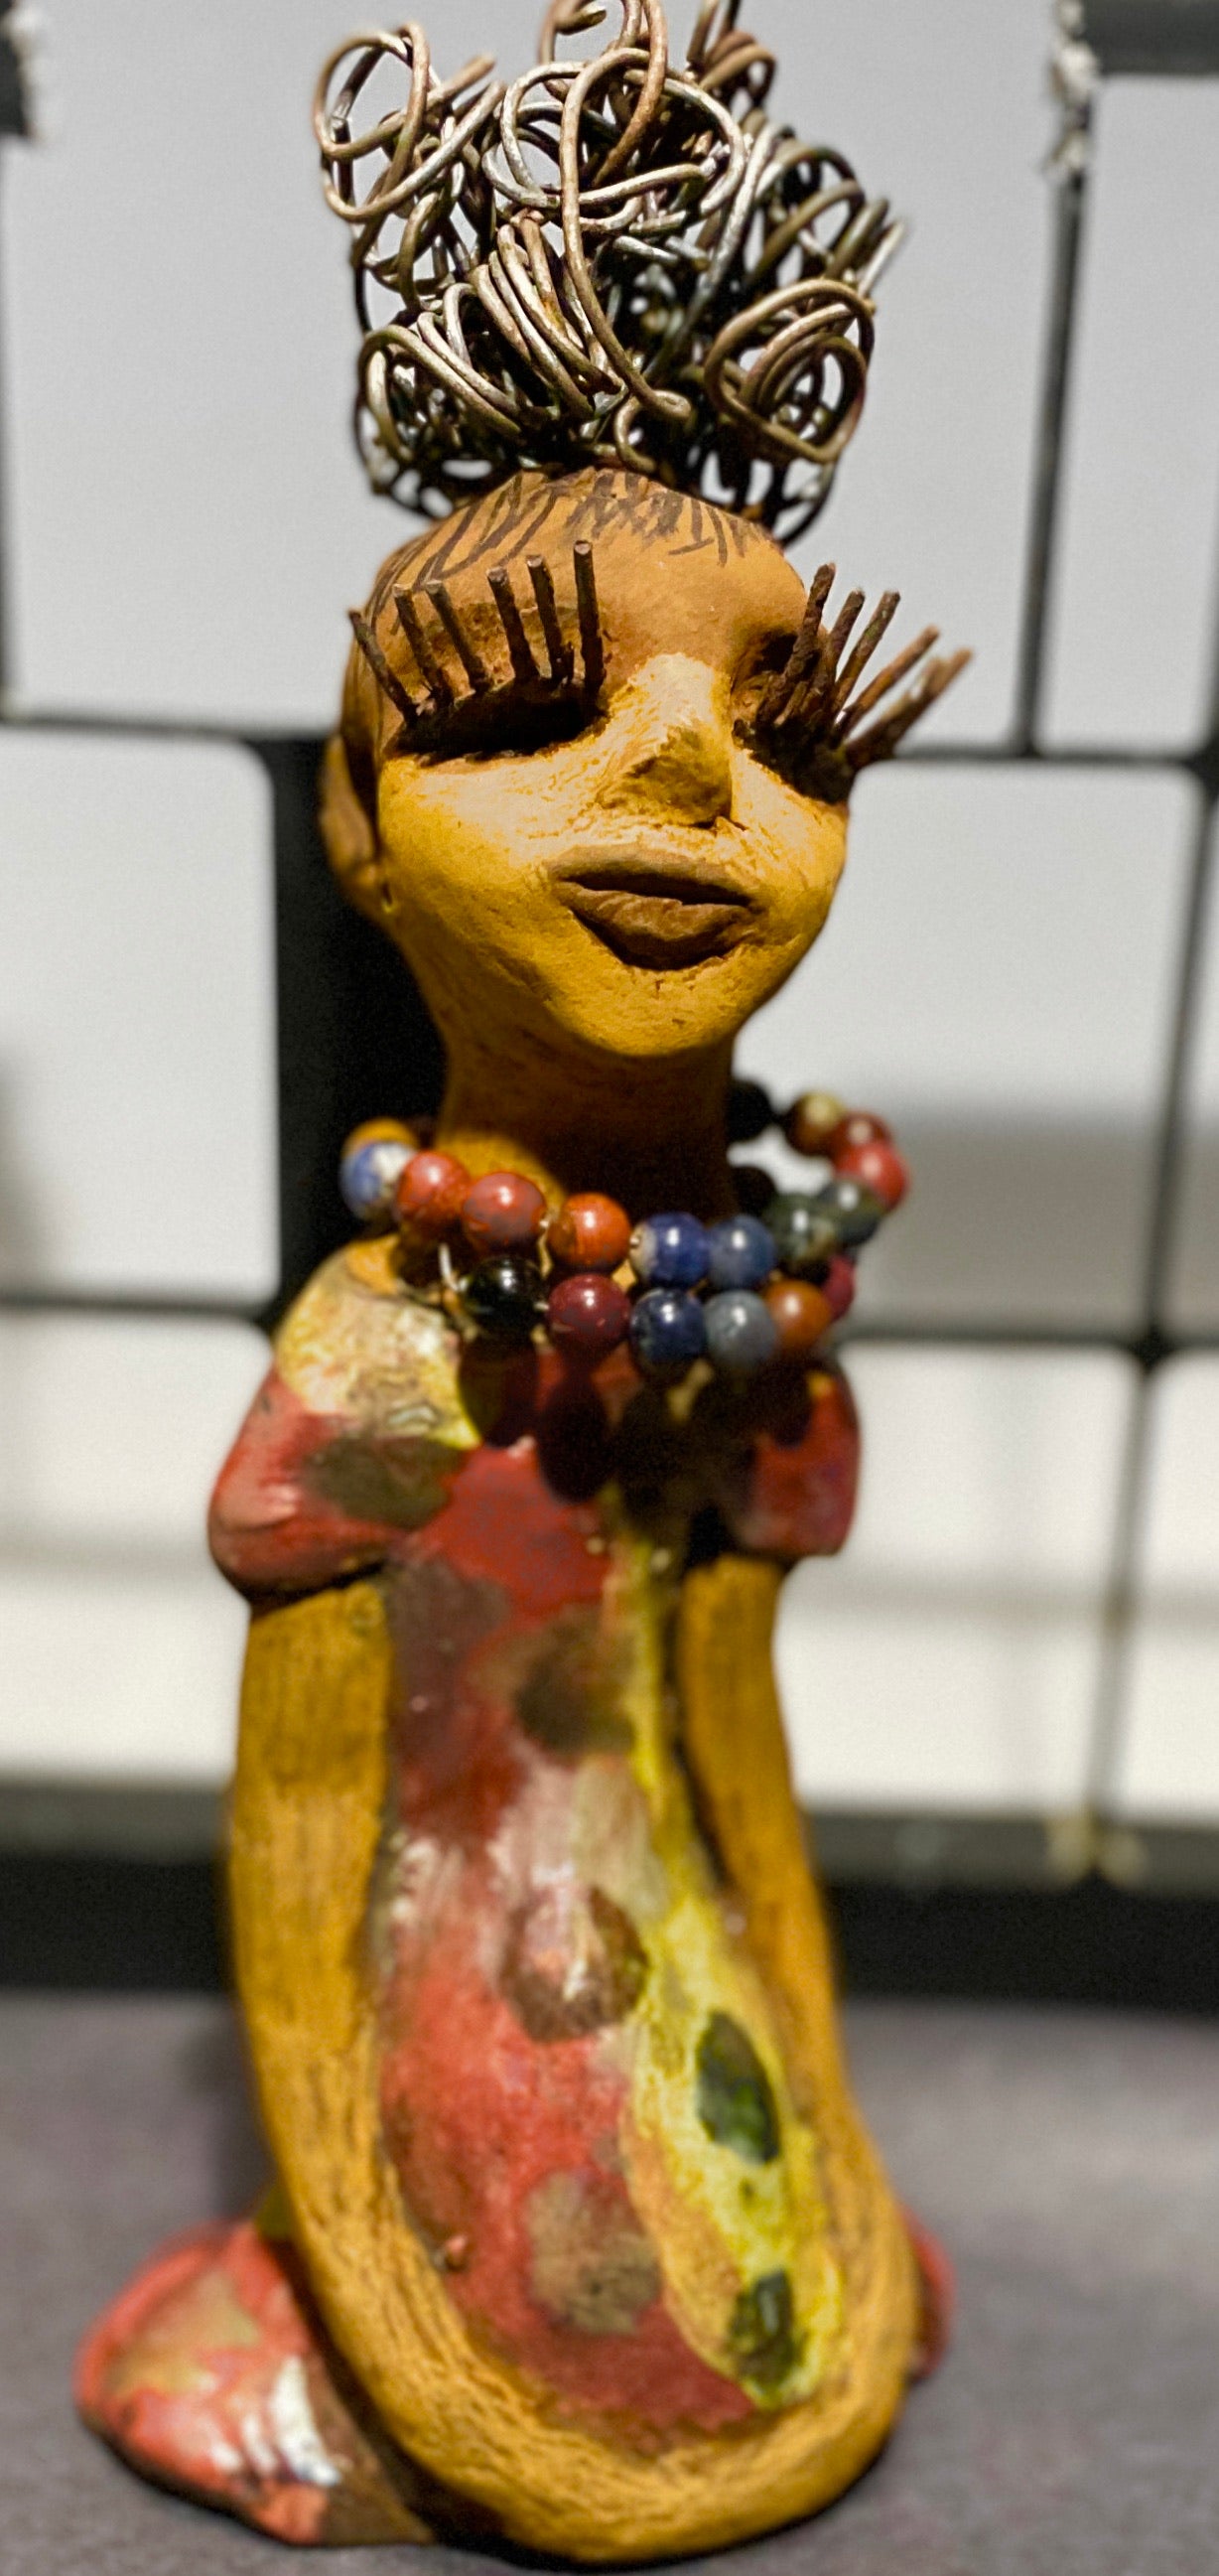  You know someone like Tiffanie. One who reaps elegance and sophistication!  Tiffanie stands 9”x 4" x 4" and weighs 1.03 lbs.  She has a two tone light beige complexion with 2 feet of 16 gauge spiral coiled wire hair.  Tiffanie metallic copper red and yellow  dress is accented by a multicolored beaded necklace. Tiffanie’s long lashes and  black eye shadow gives her a distinguished mystical look. 